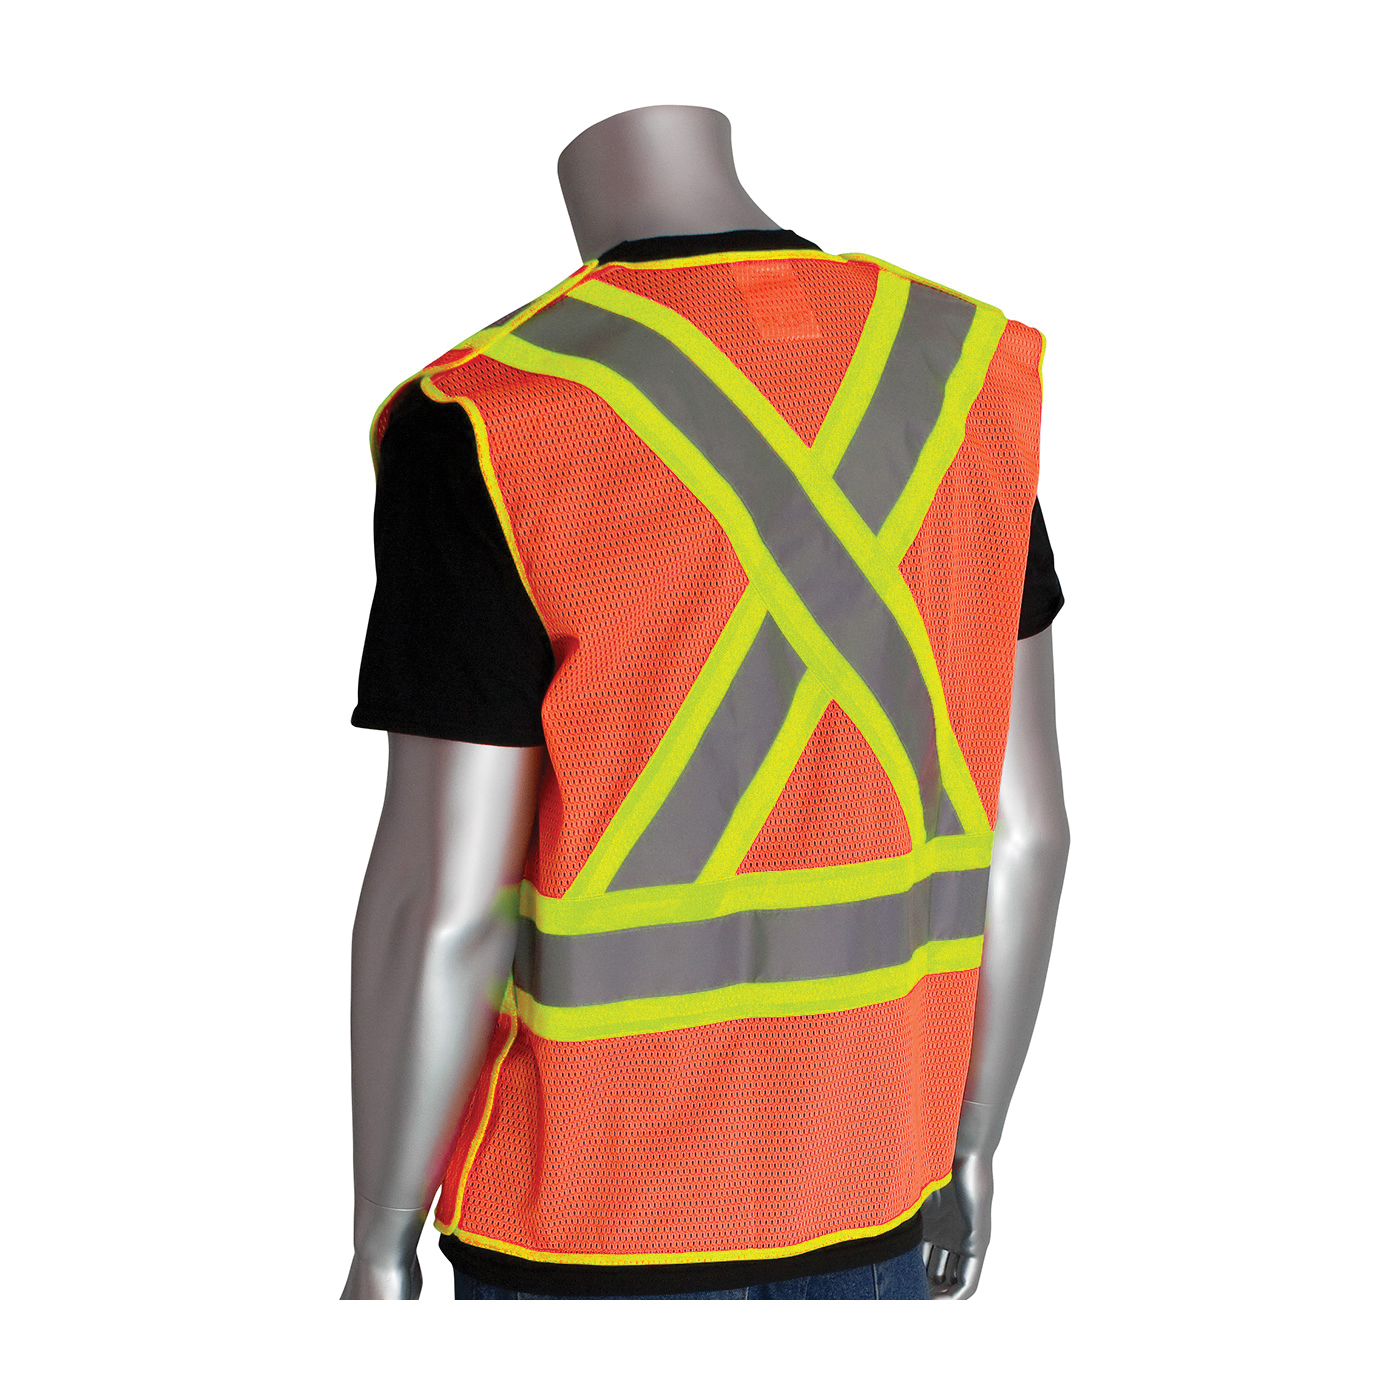 PIP® 302-0211-OR/M 2-Tone X-Back Safety Vest, M, Hi-Viz Orange, Polyester Mesh, Hook and Loop Closure, 5 Pockets, ANSI Class: Class 2, Specifications Met: ANSI 107 Type R, CAN/CSA Z96